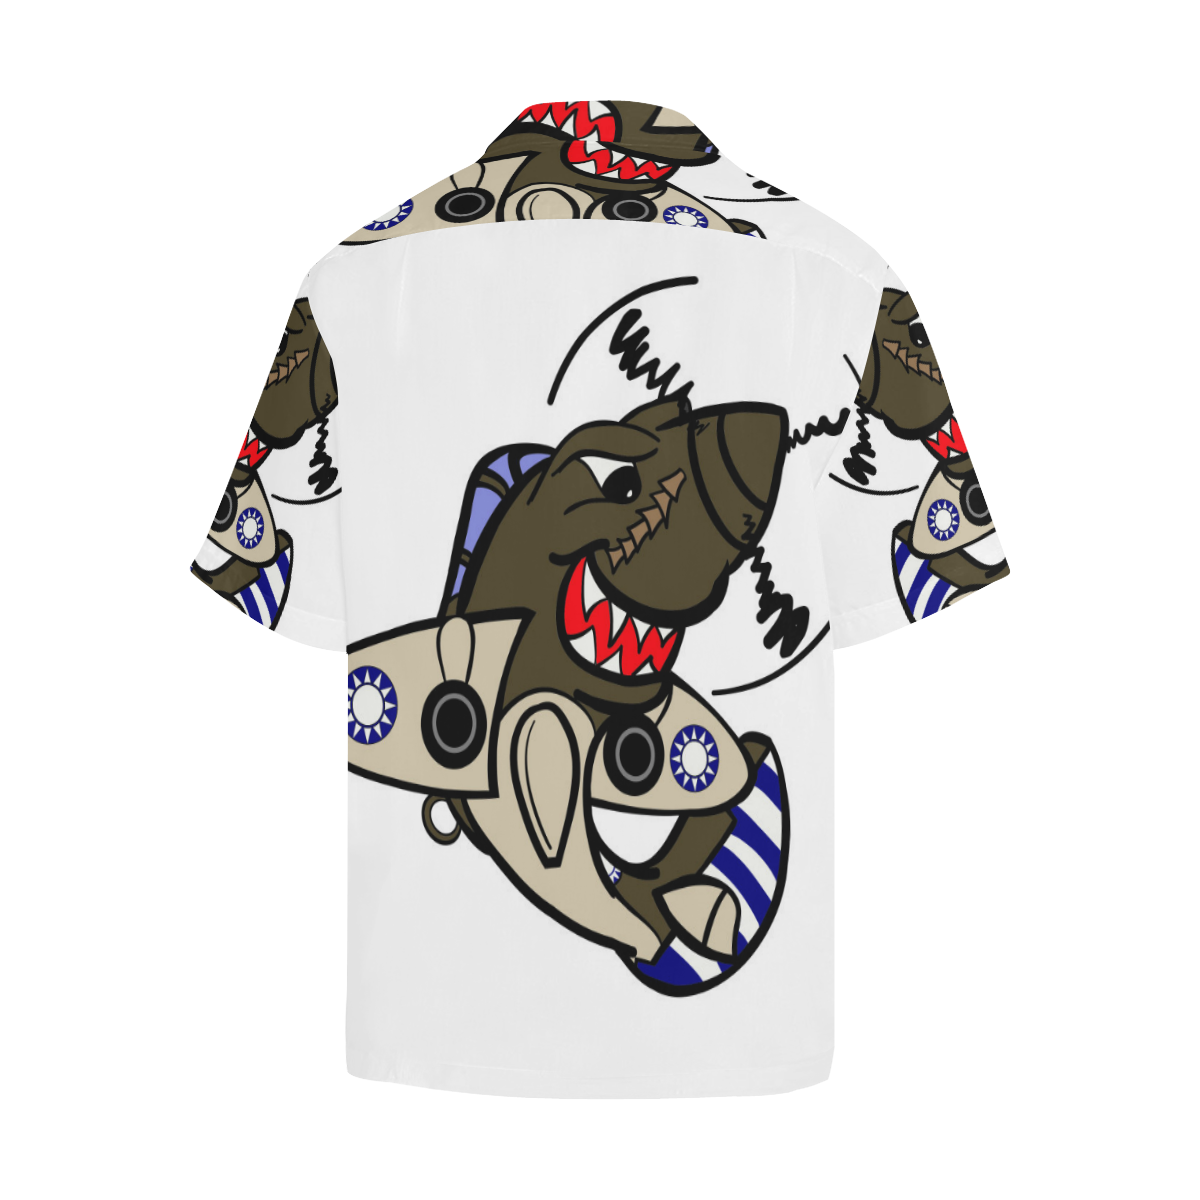 back side image of white SHARK ATTACK HAWAIIAN SHIRT. A shark on surfing board is depicted on shirt.